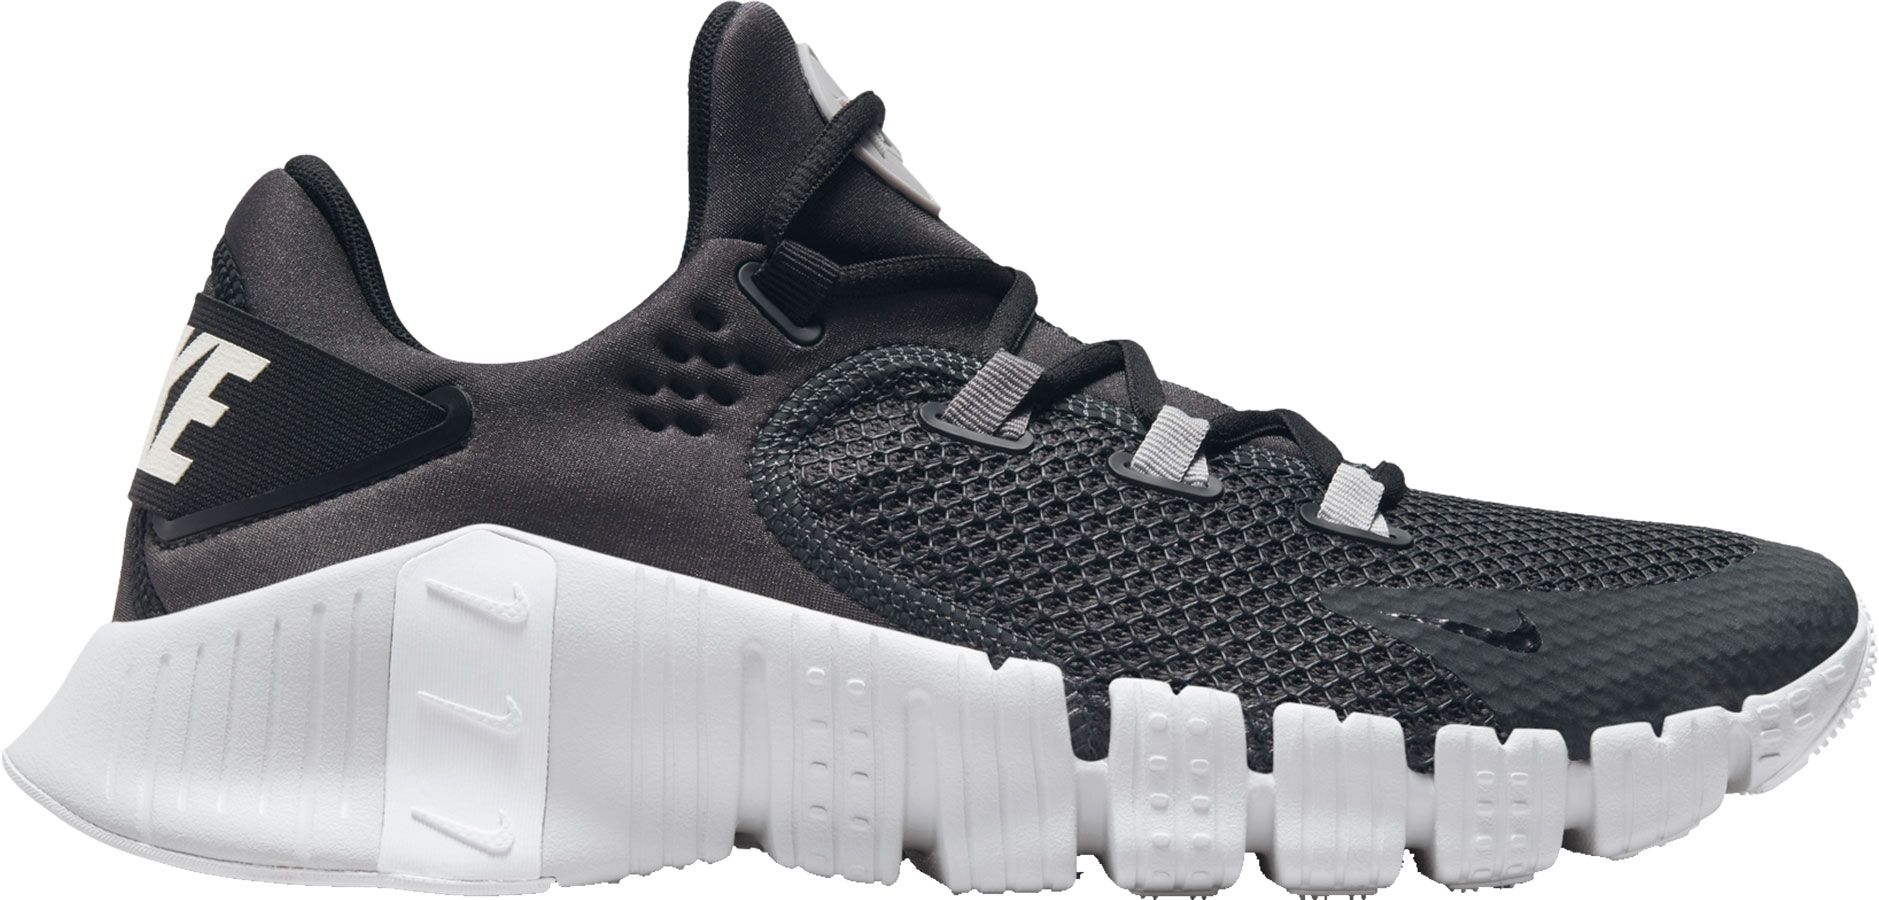 nike free metcon 4 training shoes stores